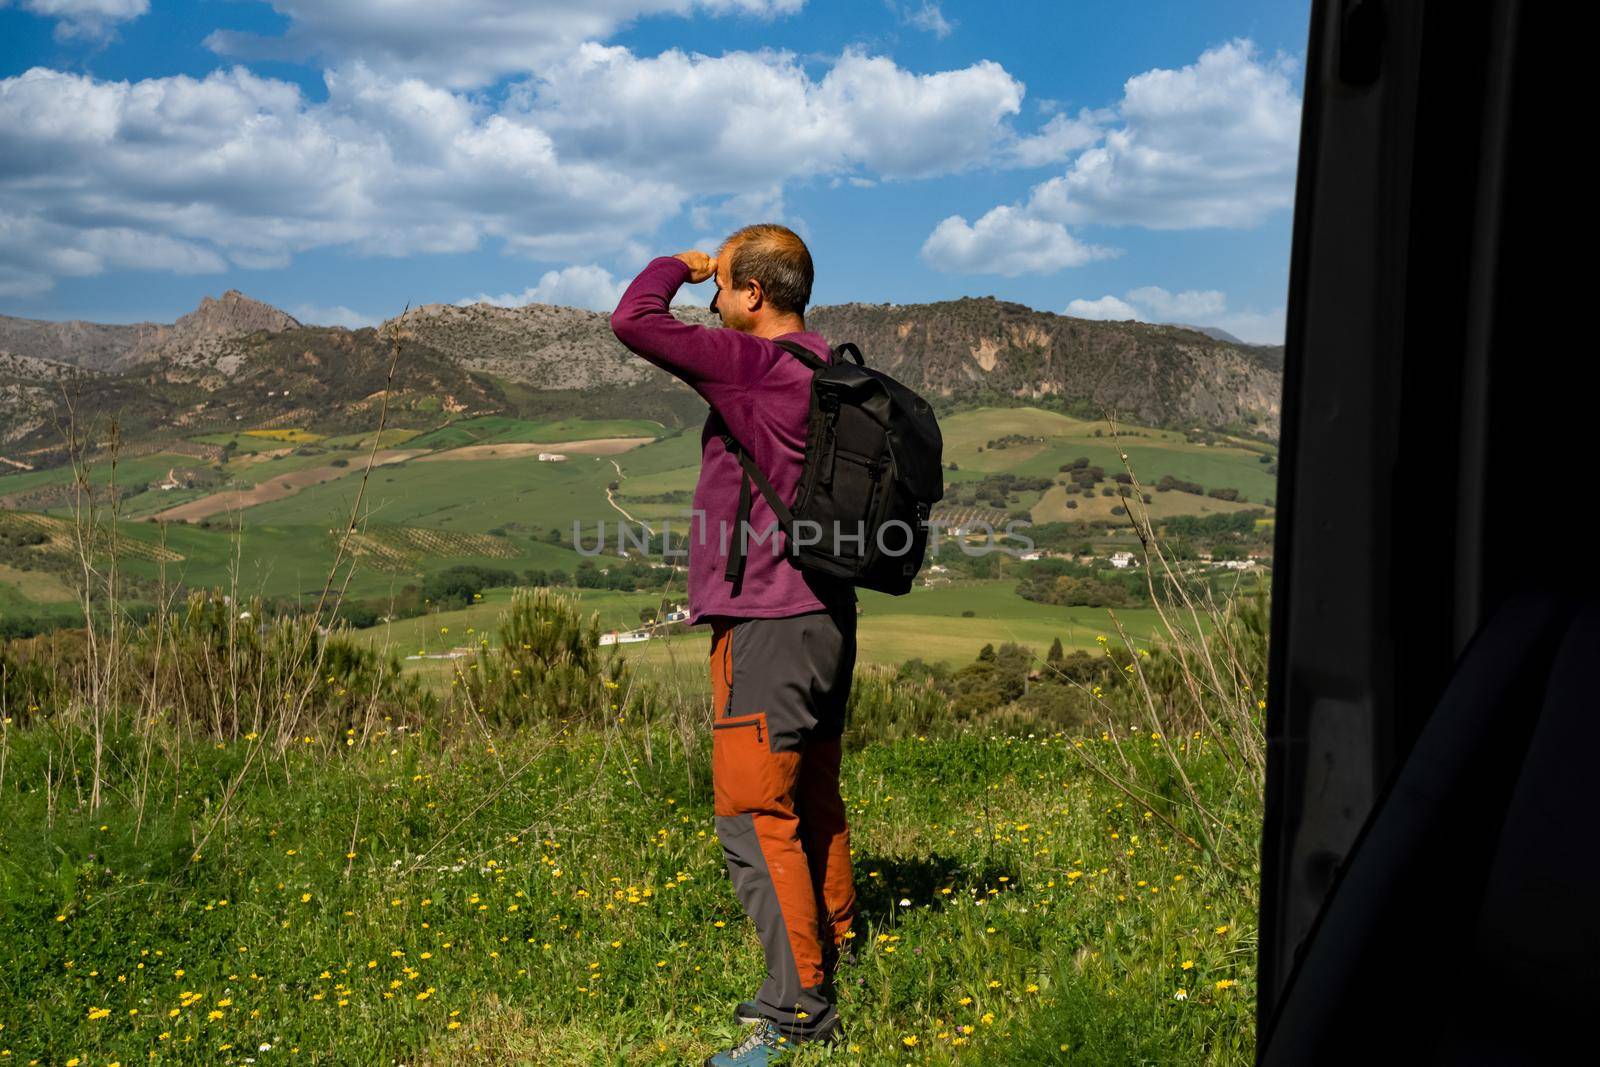 man with backpack observing the horizon mountain landscape in the background and cloudy sky seen from inside his van